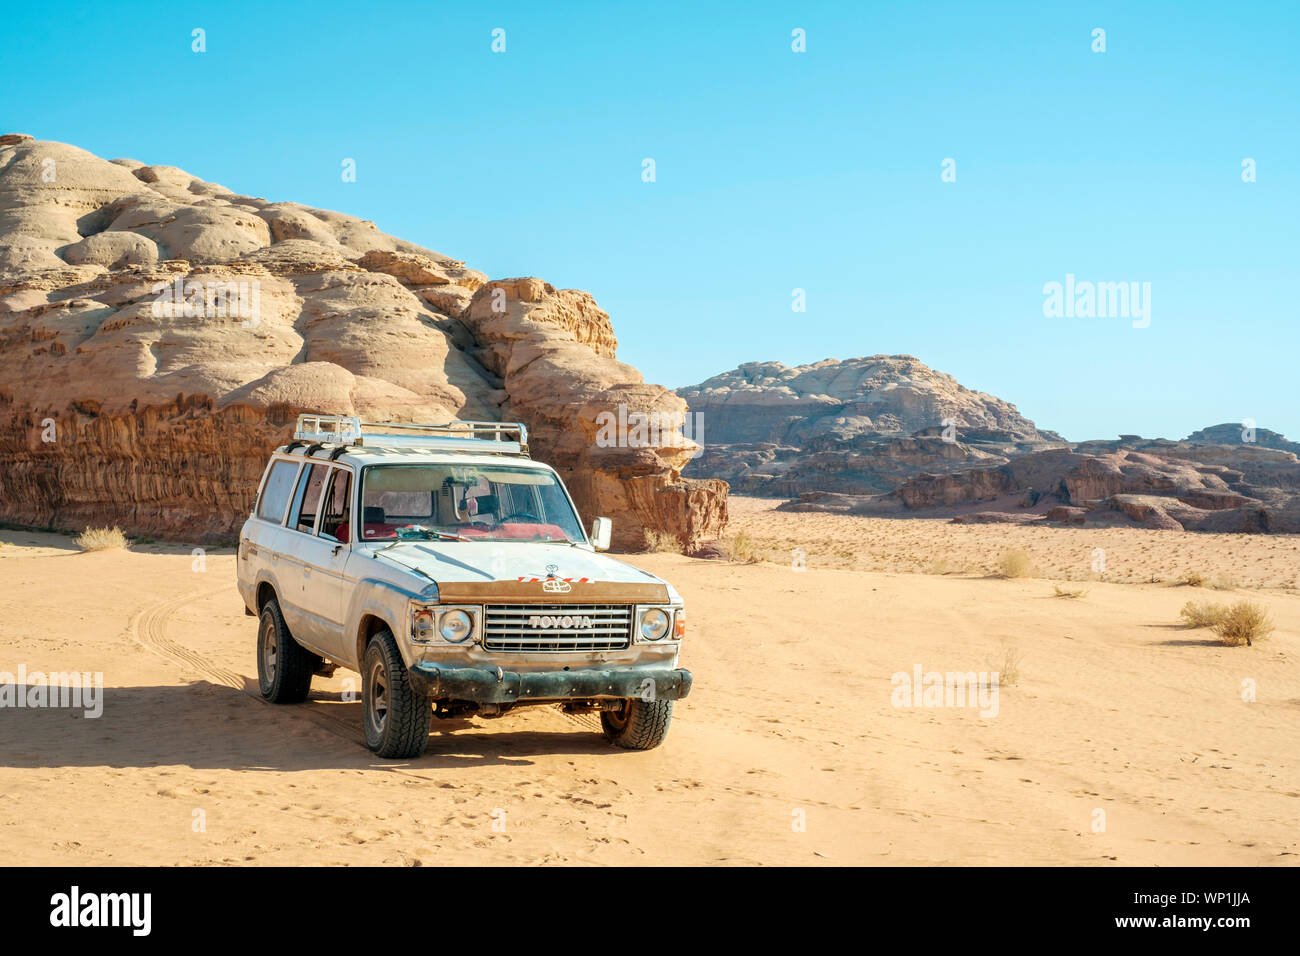 Jordan, Aqaba Governorate, Wadi Rum. Wadi Rum Protected Area, UNESCO World Heritage Site. A four wheel drive truck belonging to a local bedouin guide, Stock Photo